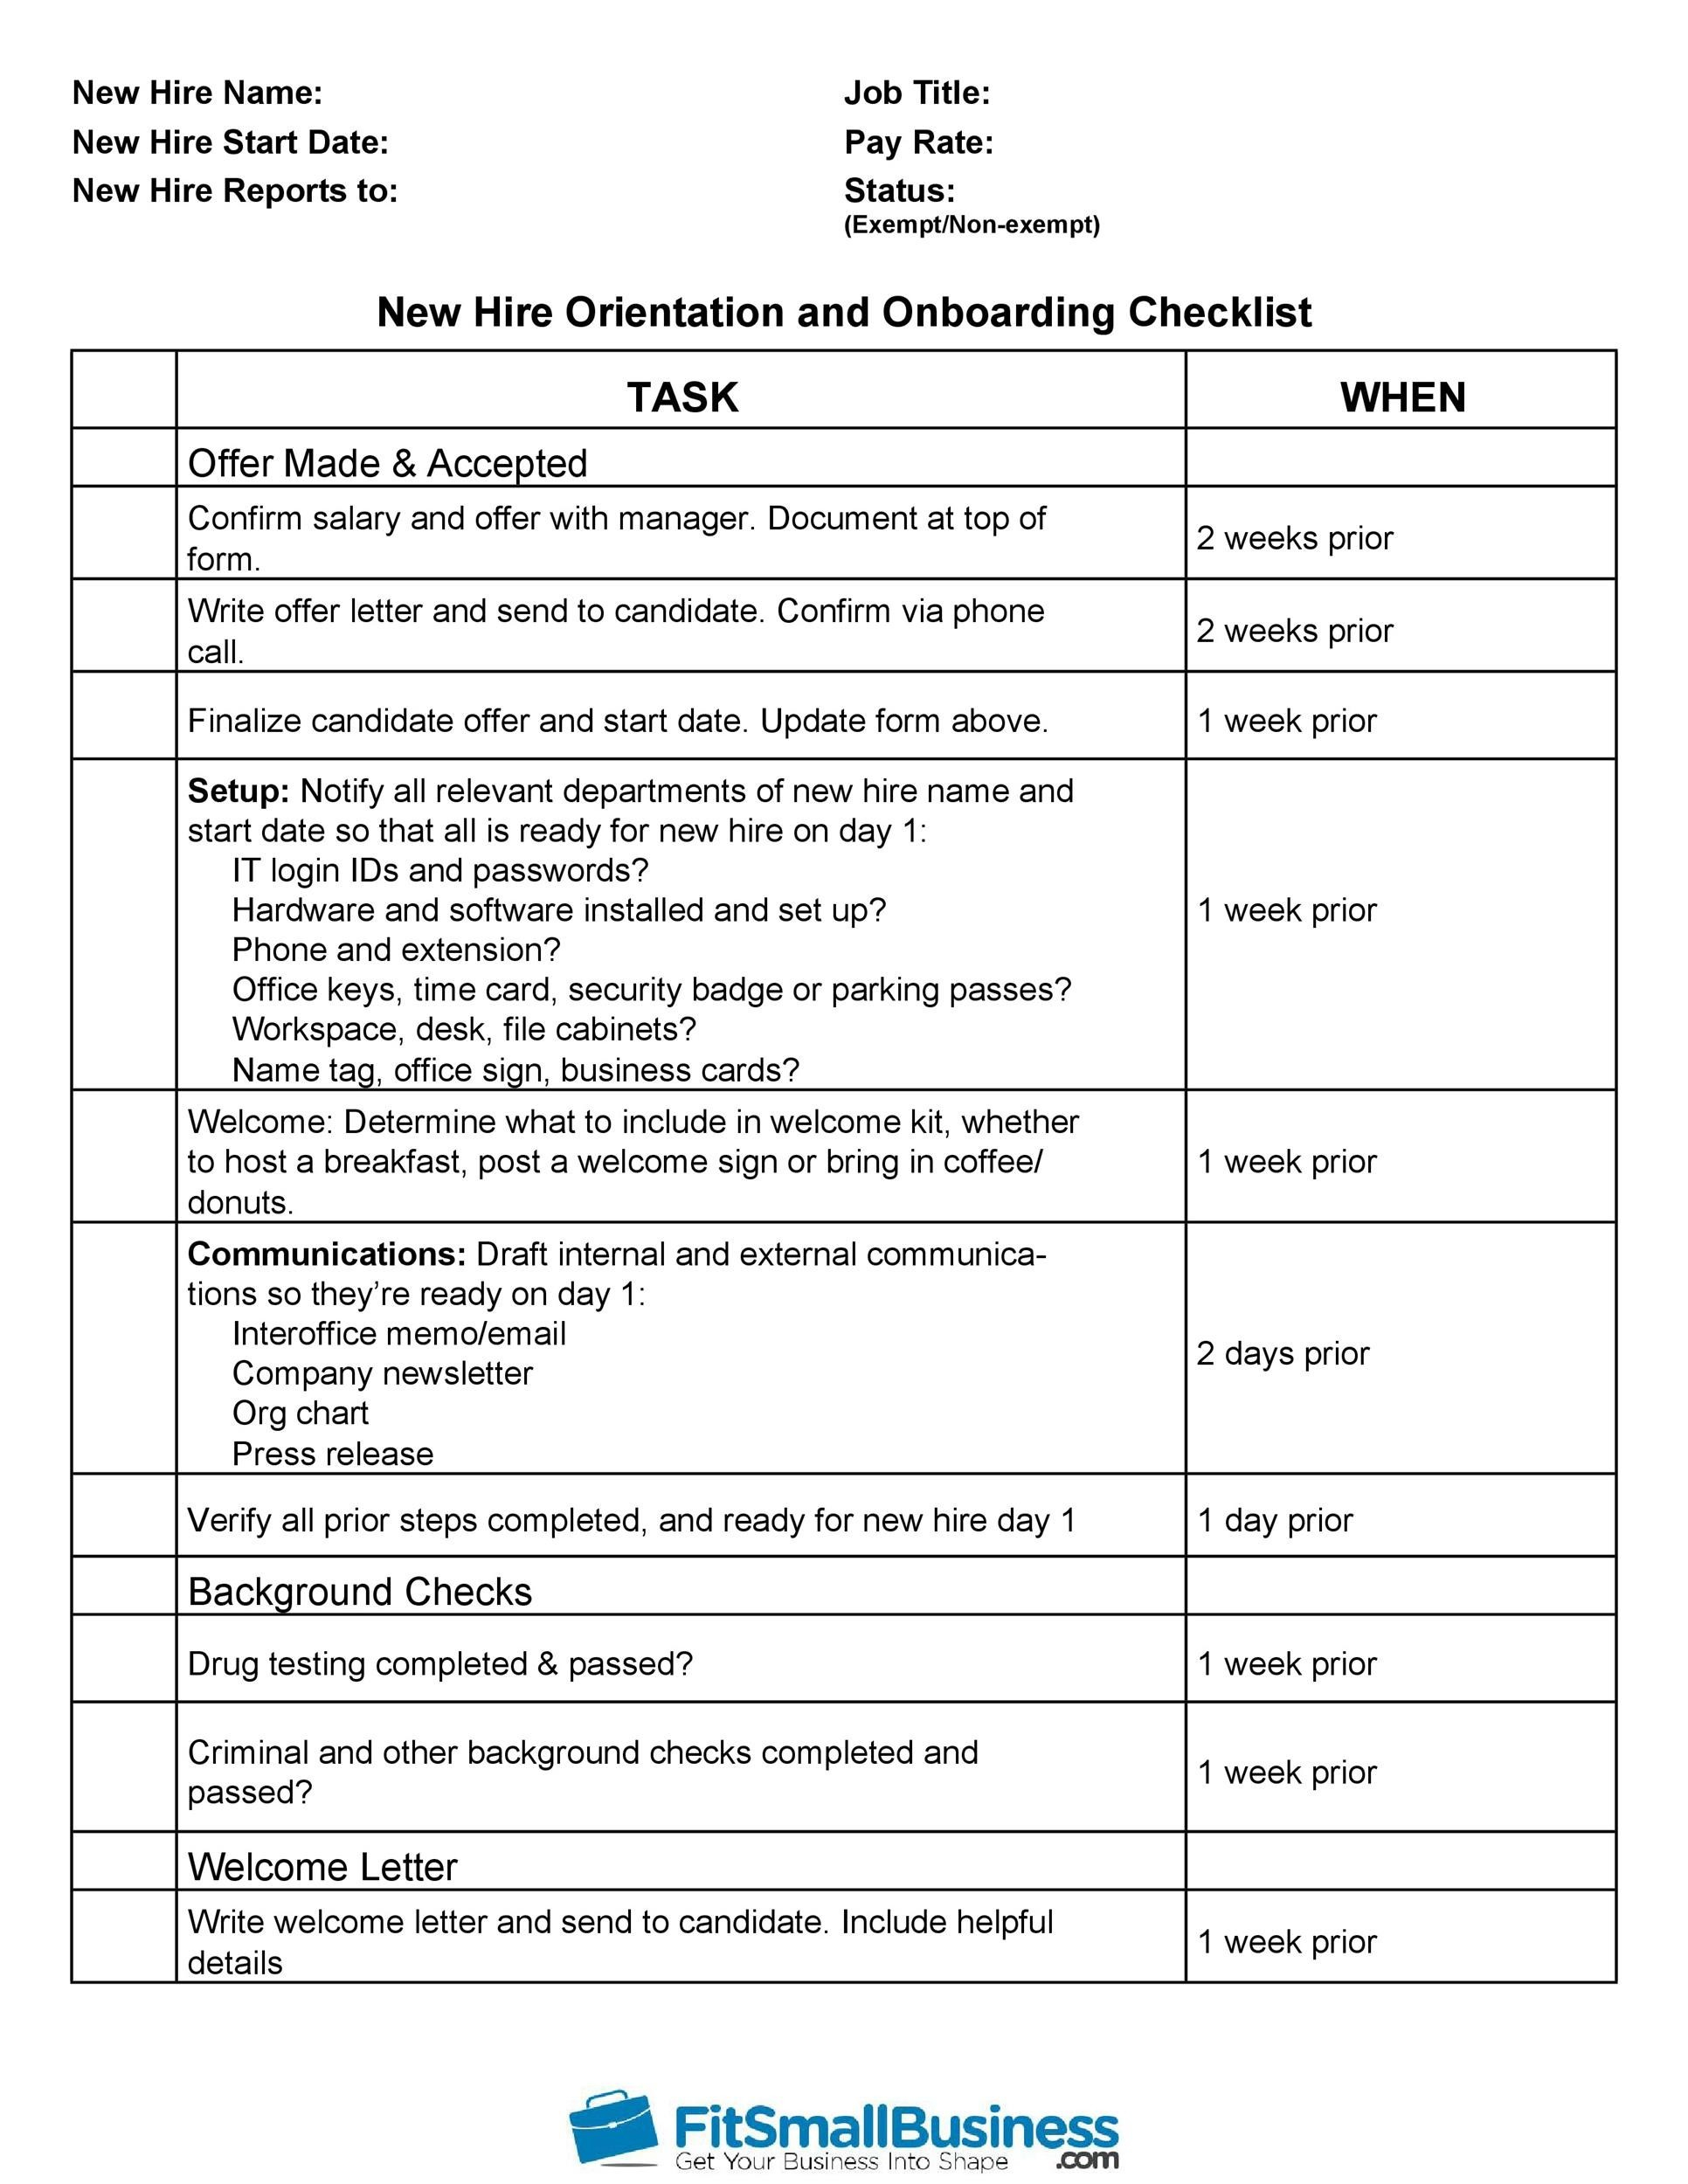 10 Useful New Hire Checklist Templates & Forms ᐅ TemplateLab For Employee New Hire Checklist Template In Employee New Hire Checklist Template